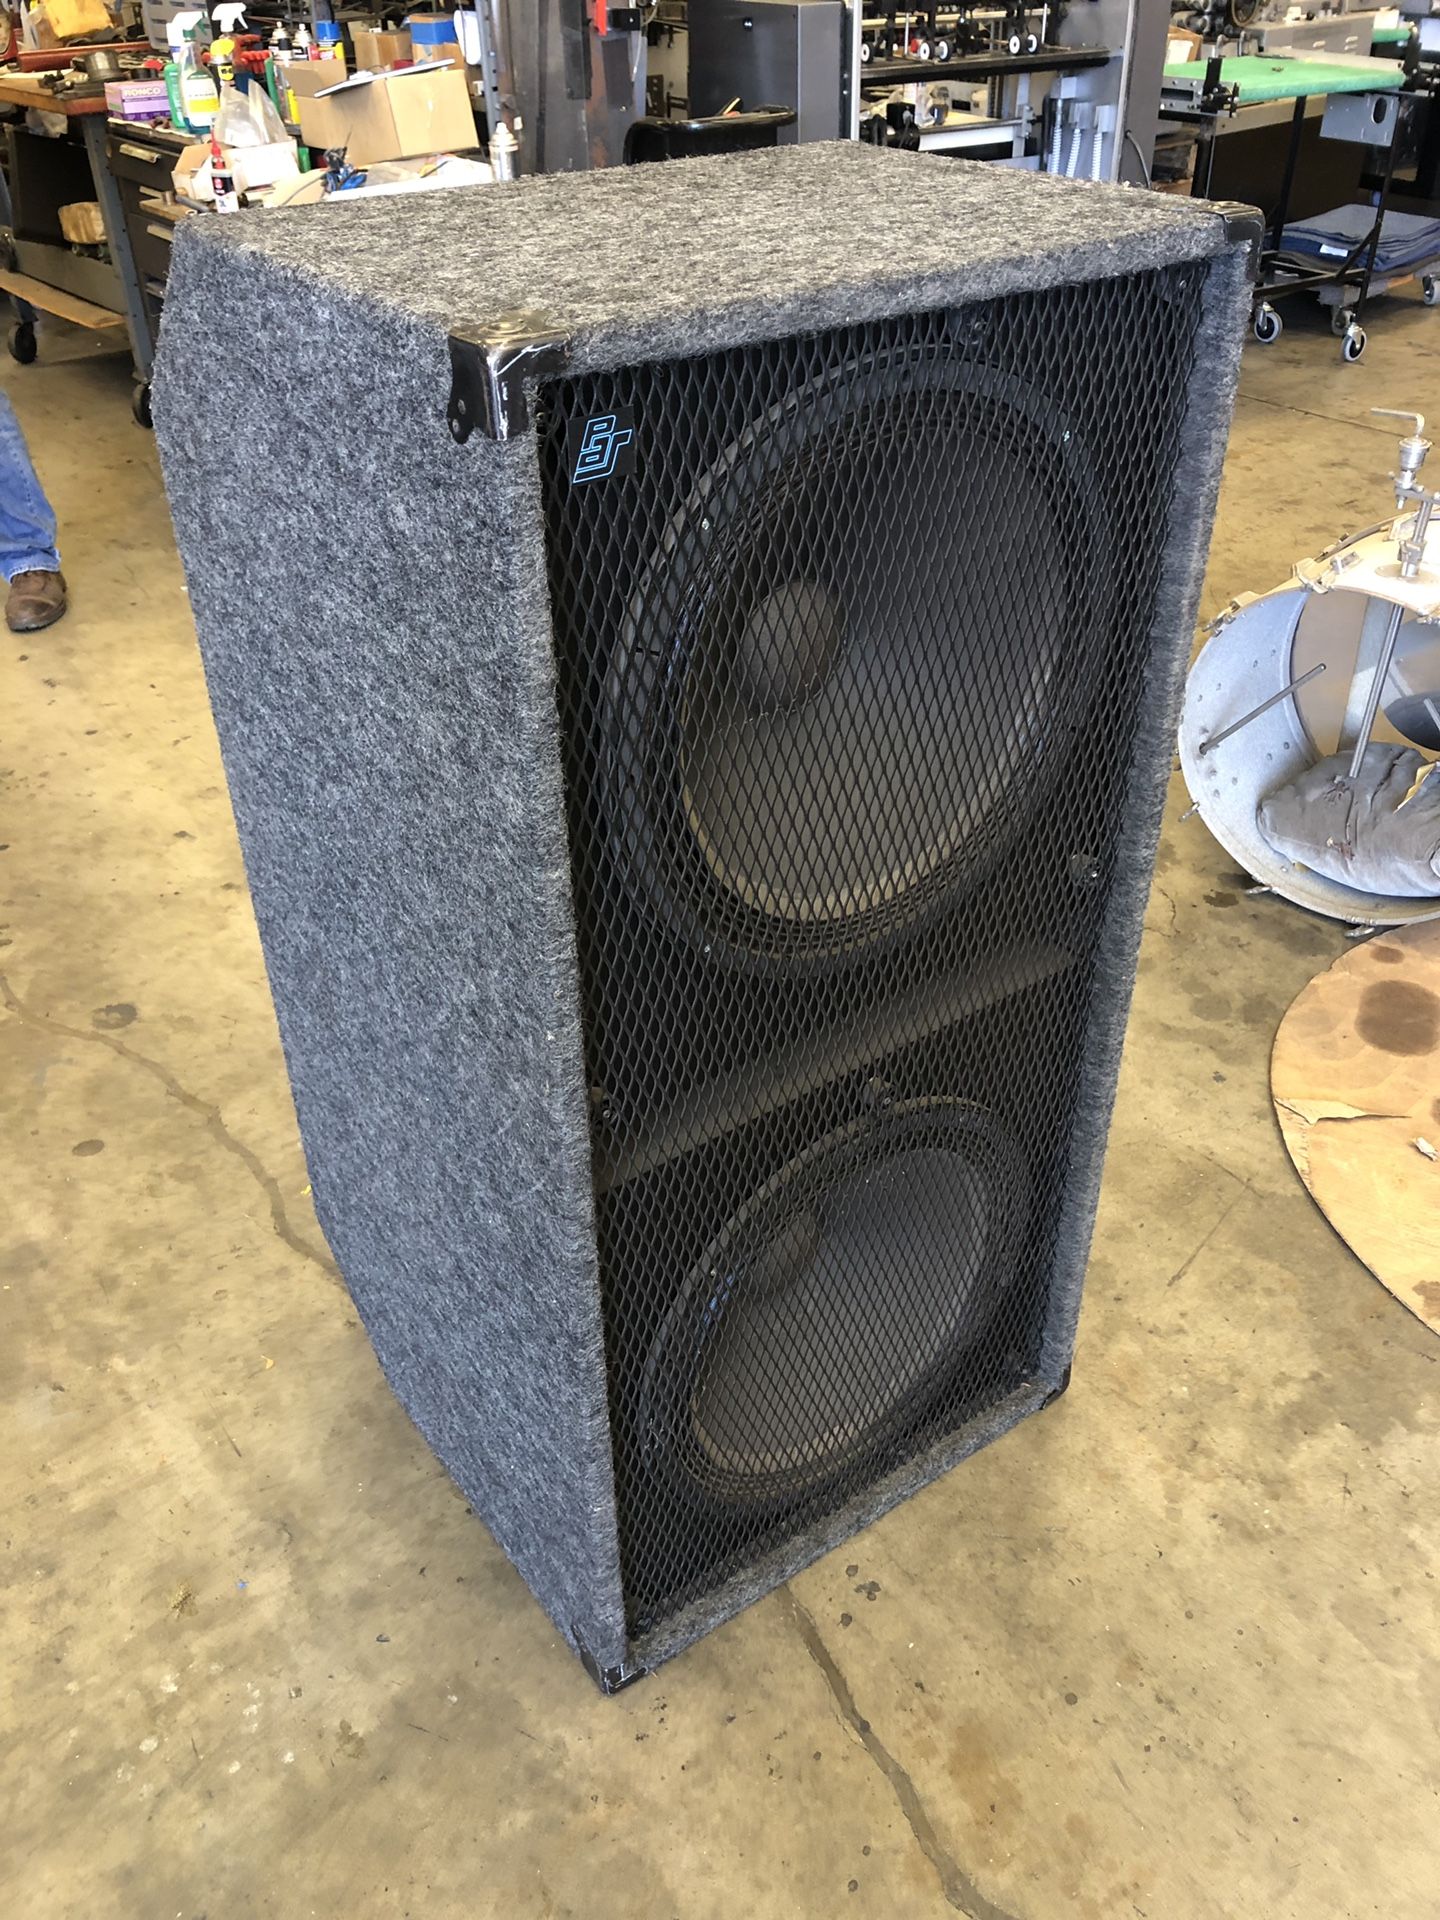 Base for guitar with 18” speakers from Professional Audio System